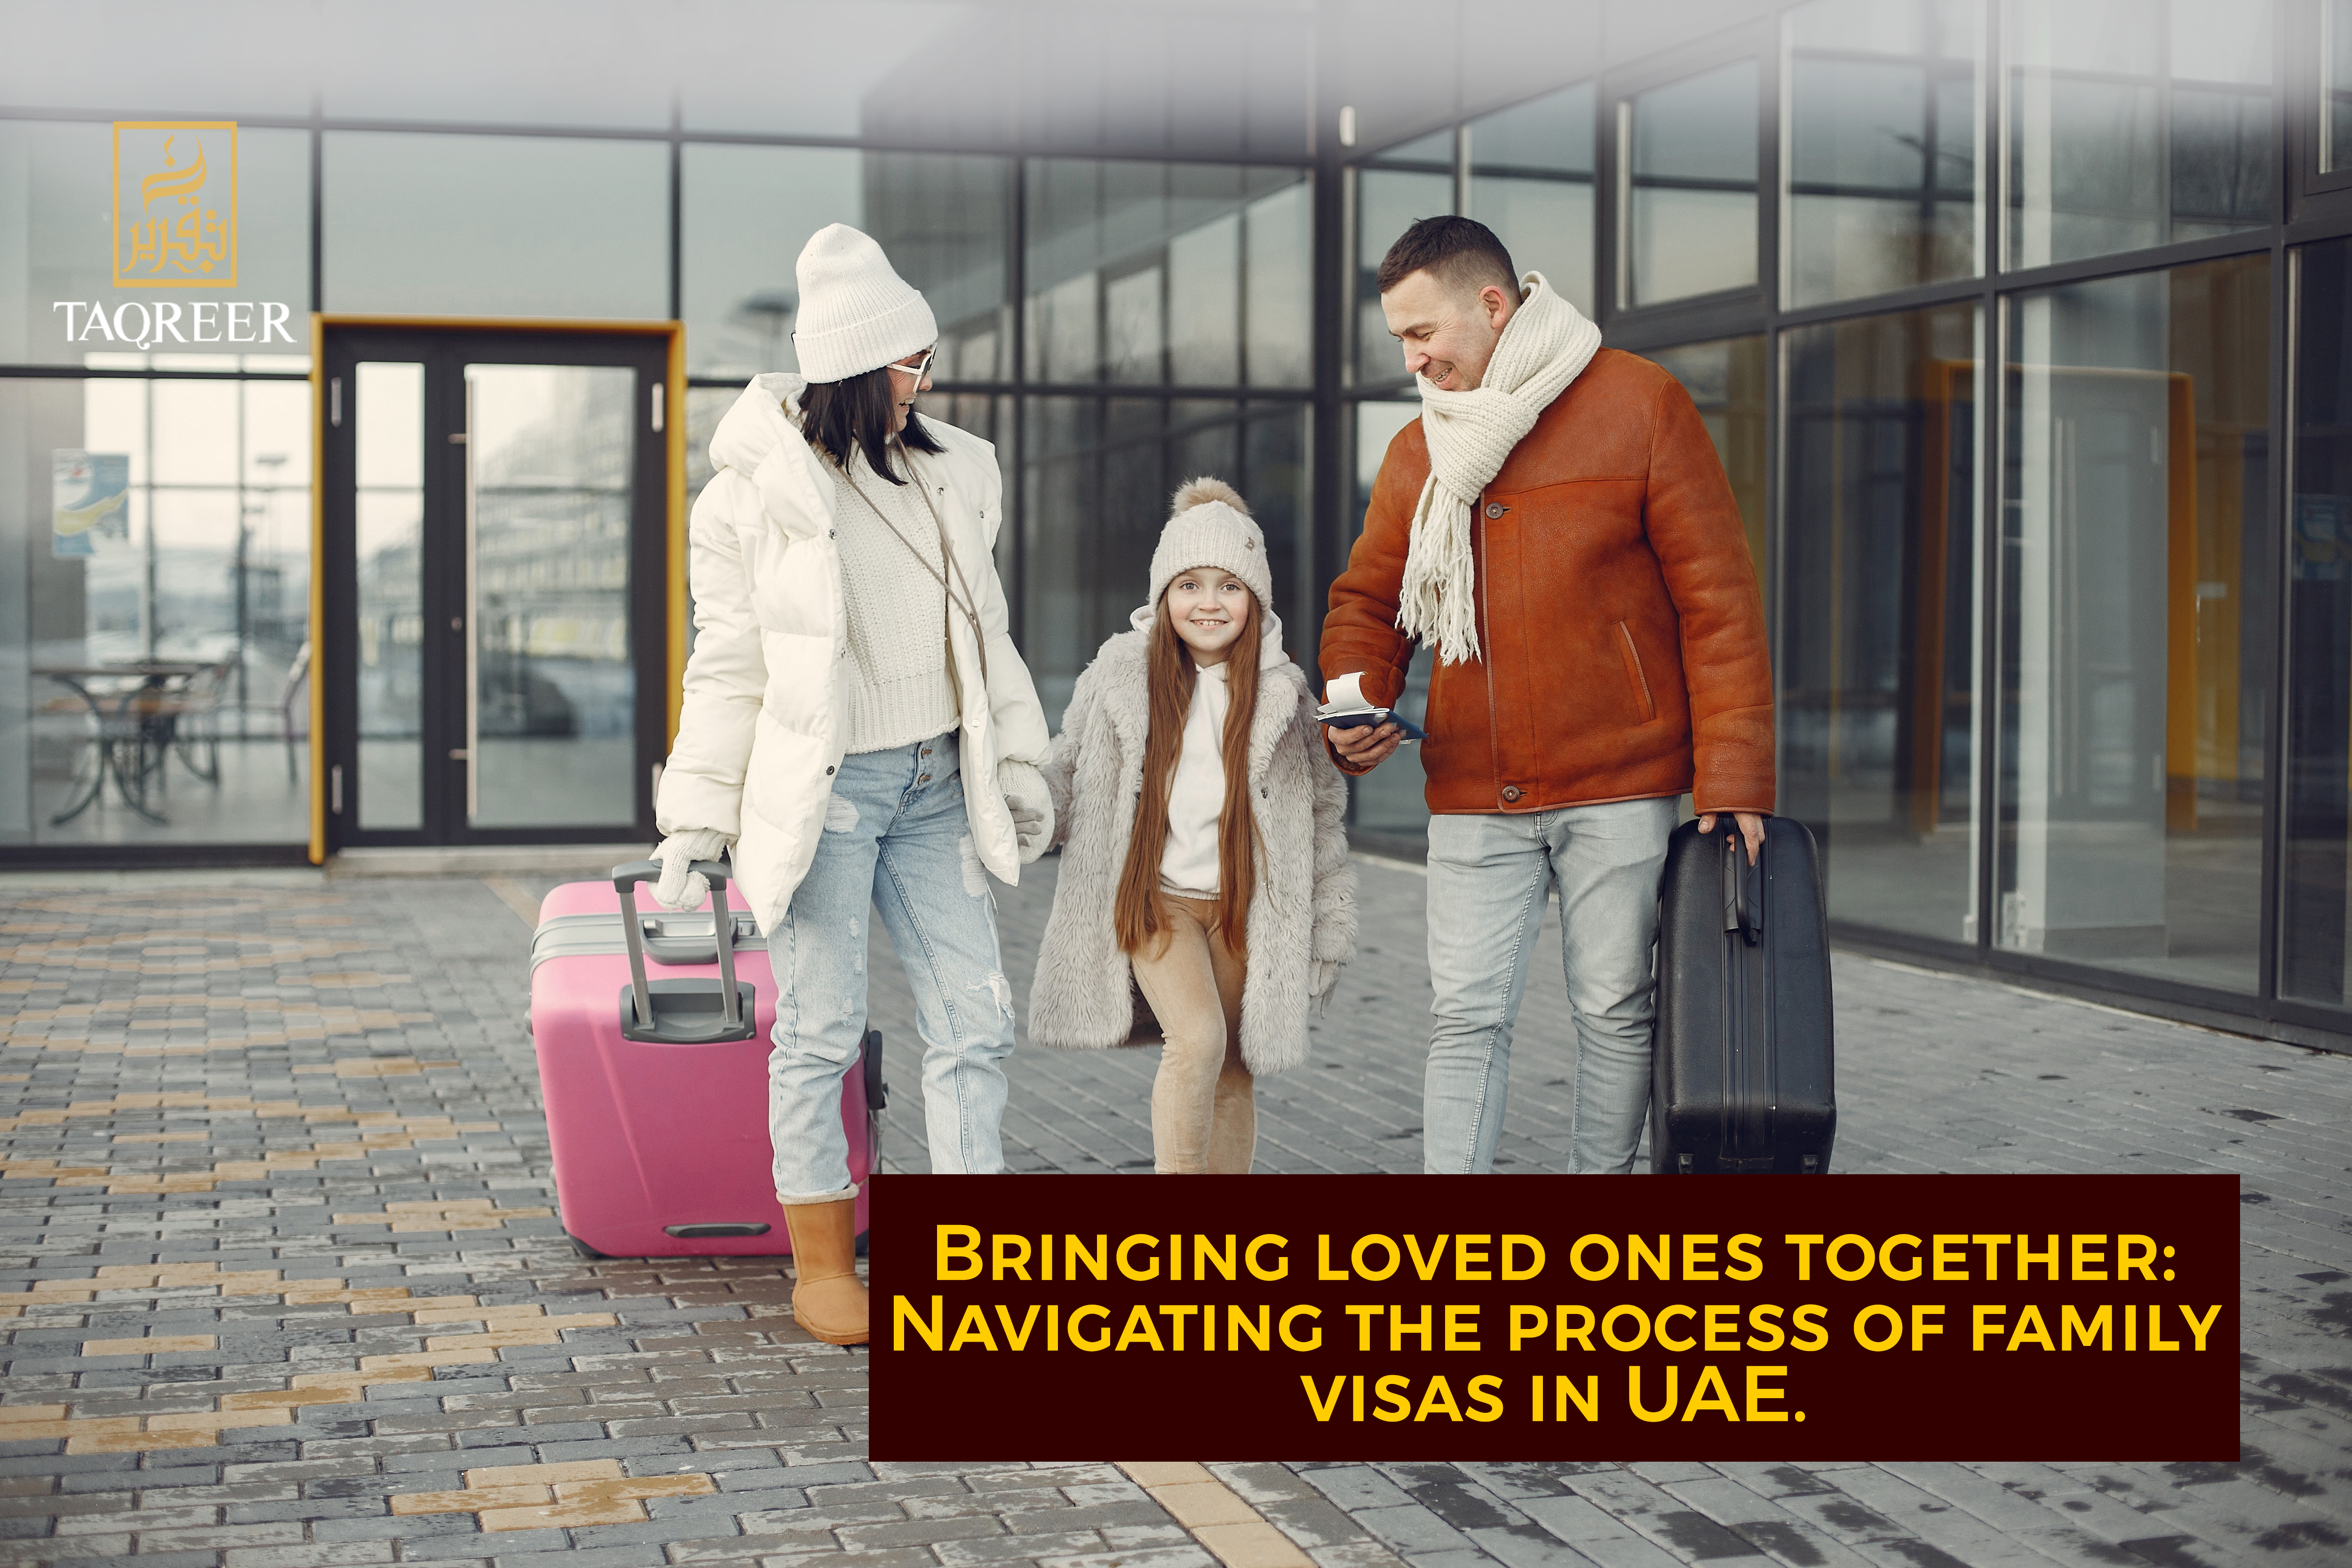 BRINGING LOVED ONES TOGETHER: NAVIGATING THE PROCESS OF FAMILY VISAS IN UAE.